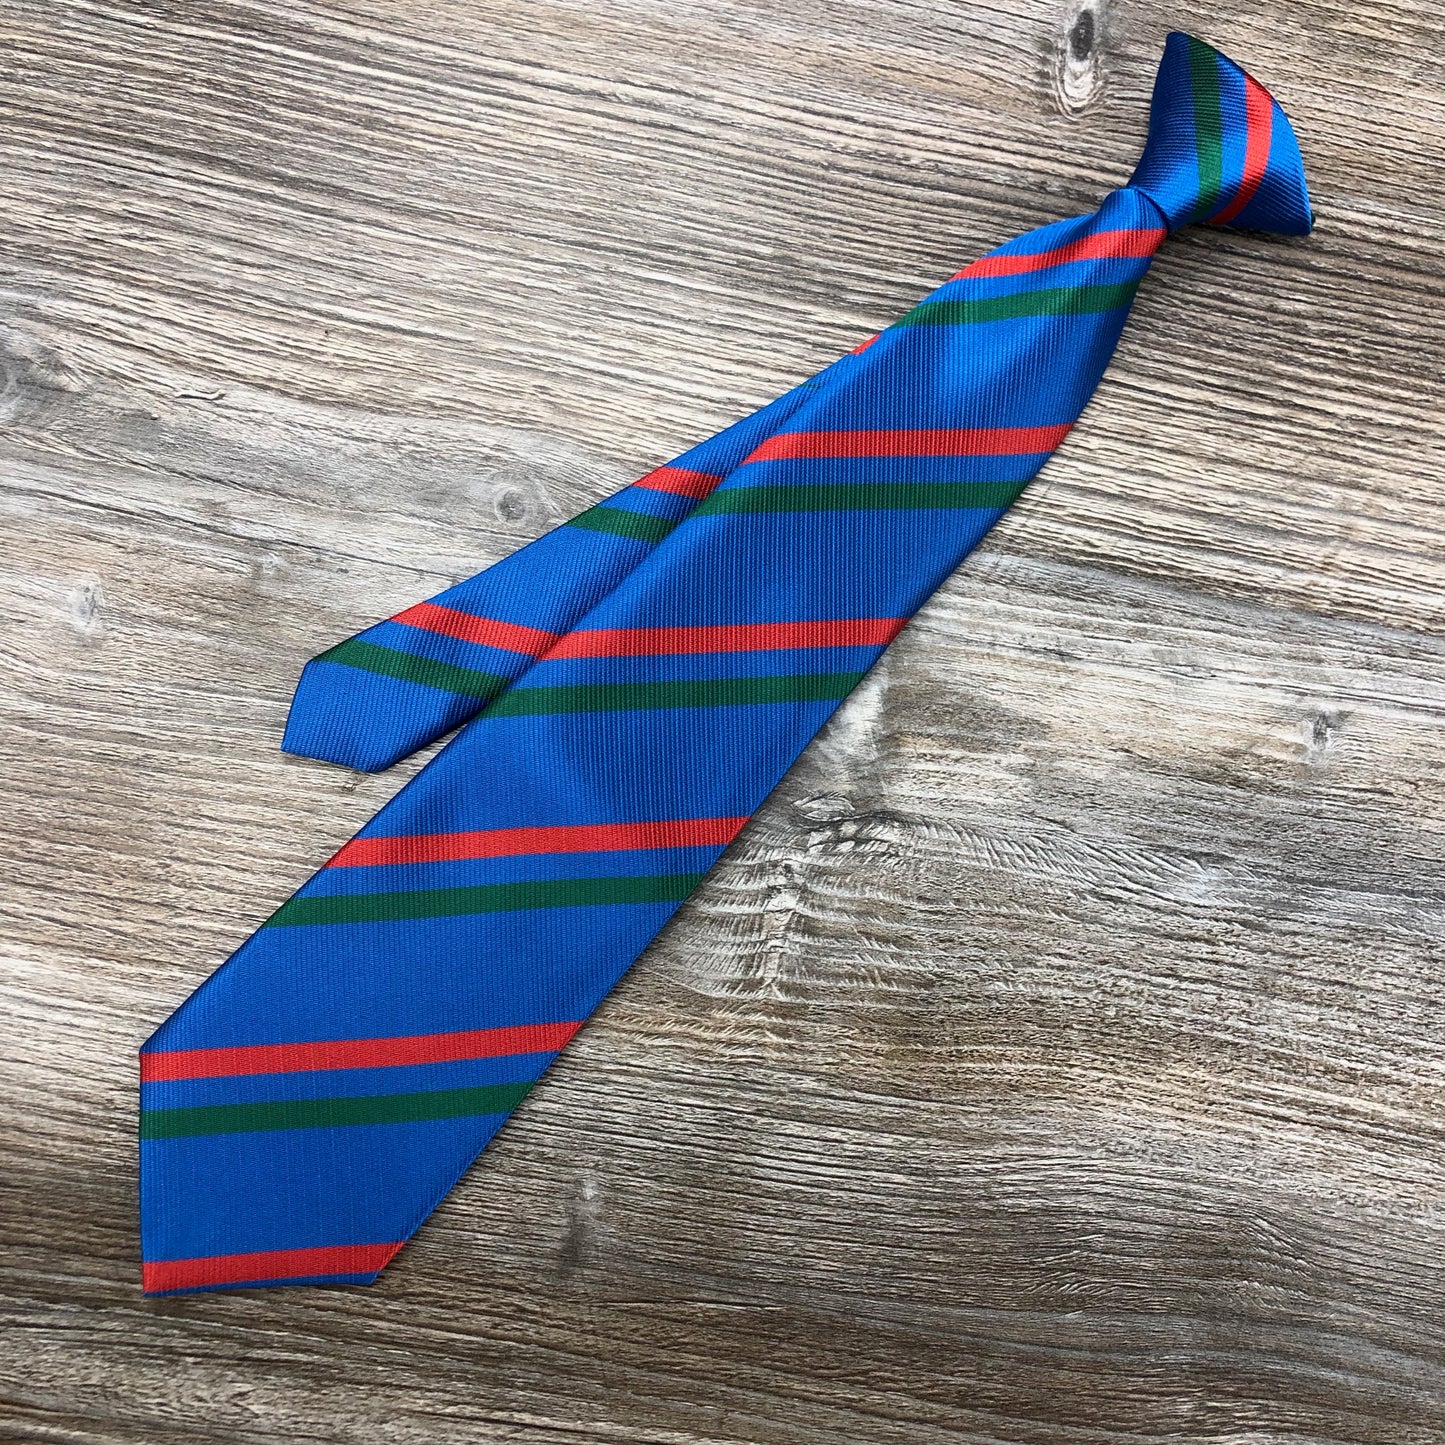 OLSJ Clip On School Tie. Our Lady & St John Catholic College royal, green and red clip on tie